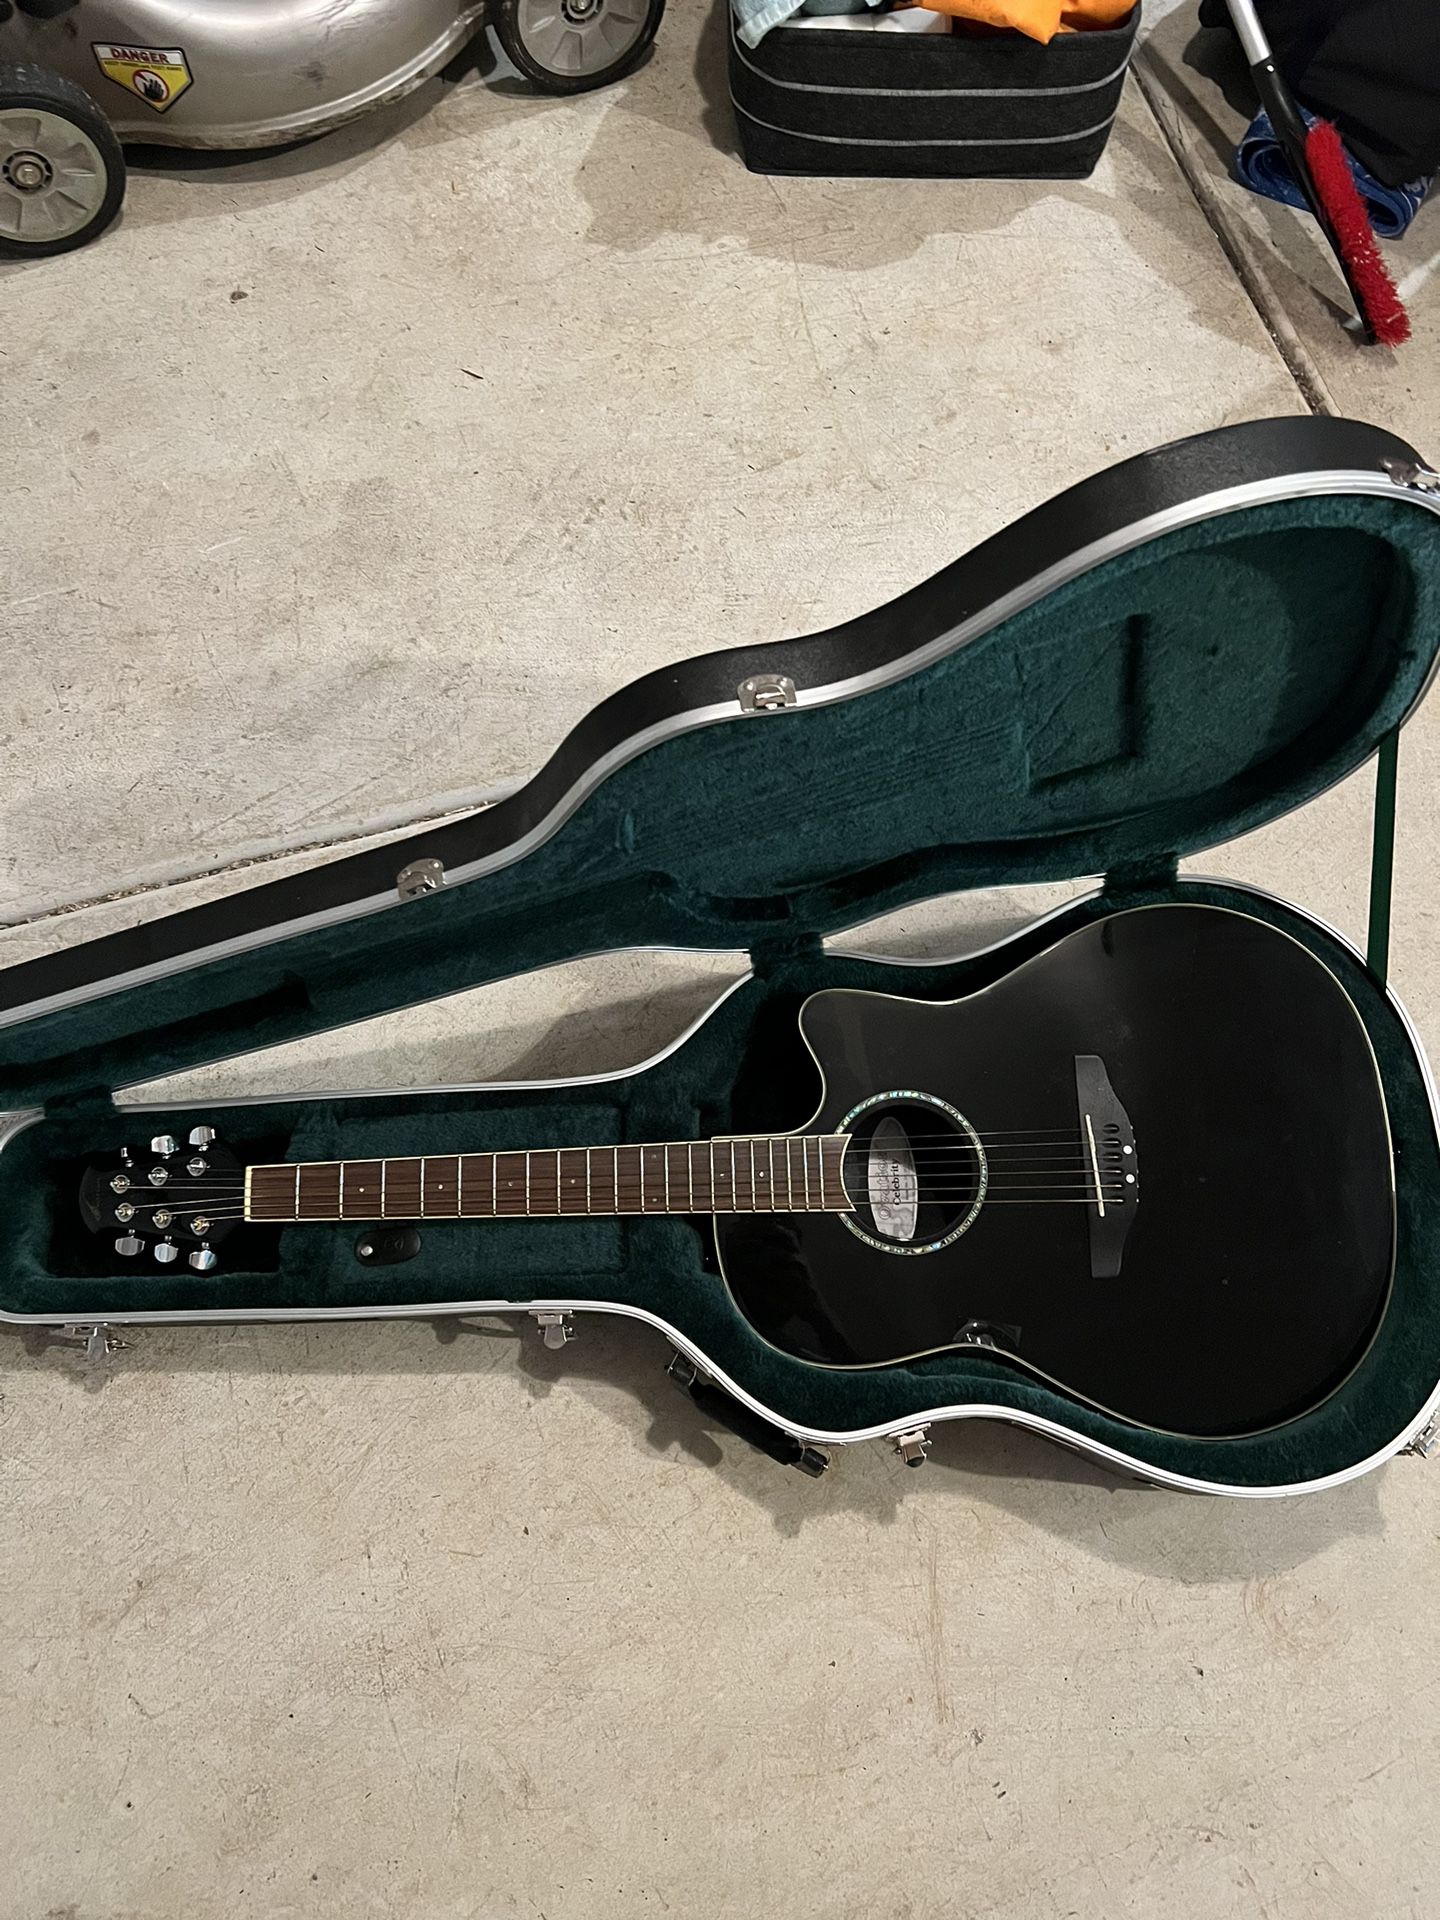 Acoustic Guitar (Ovation Applause) with hard shell case